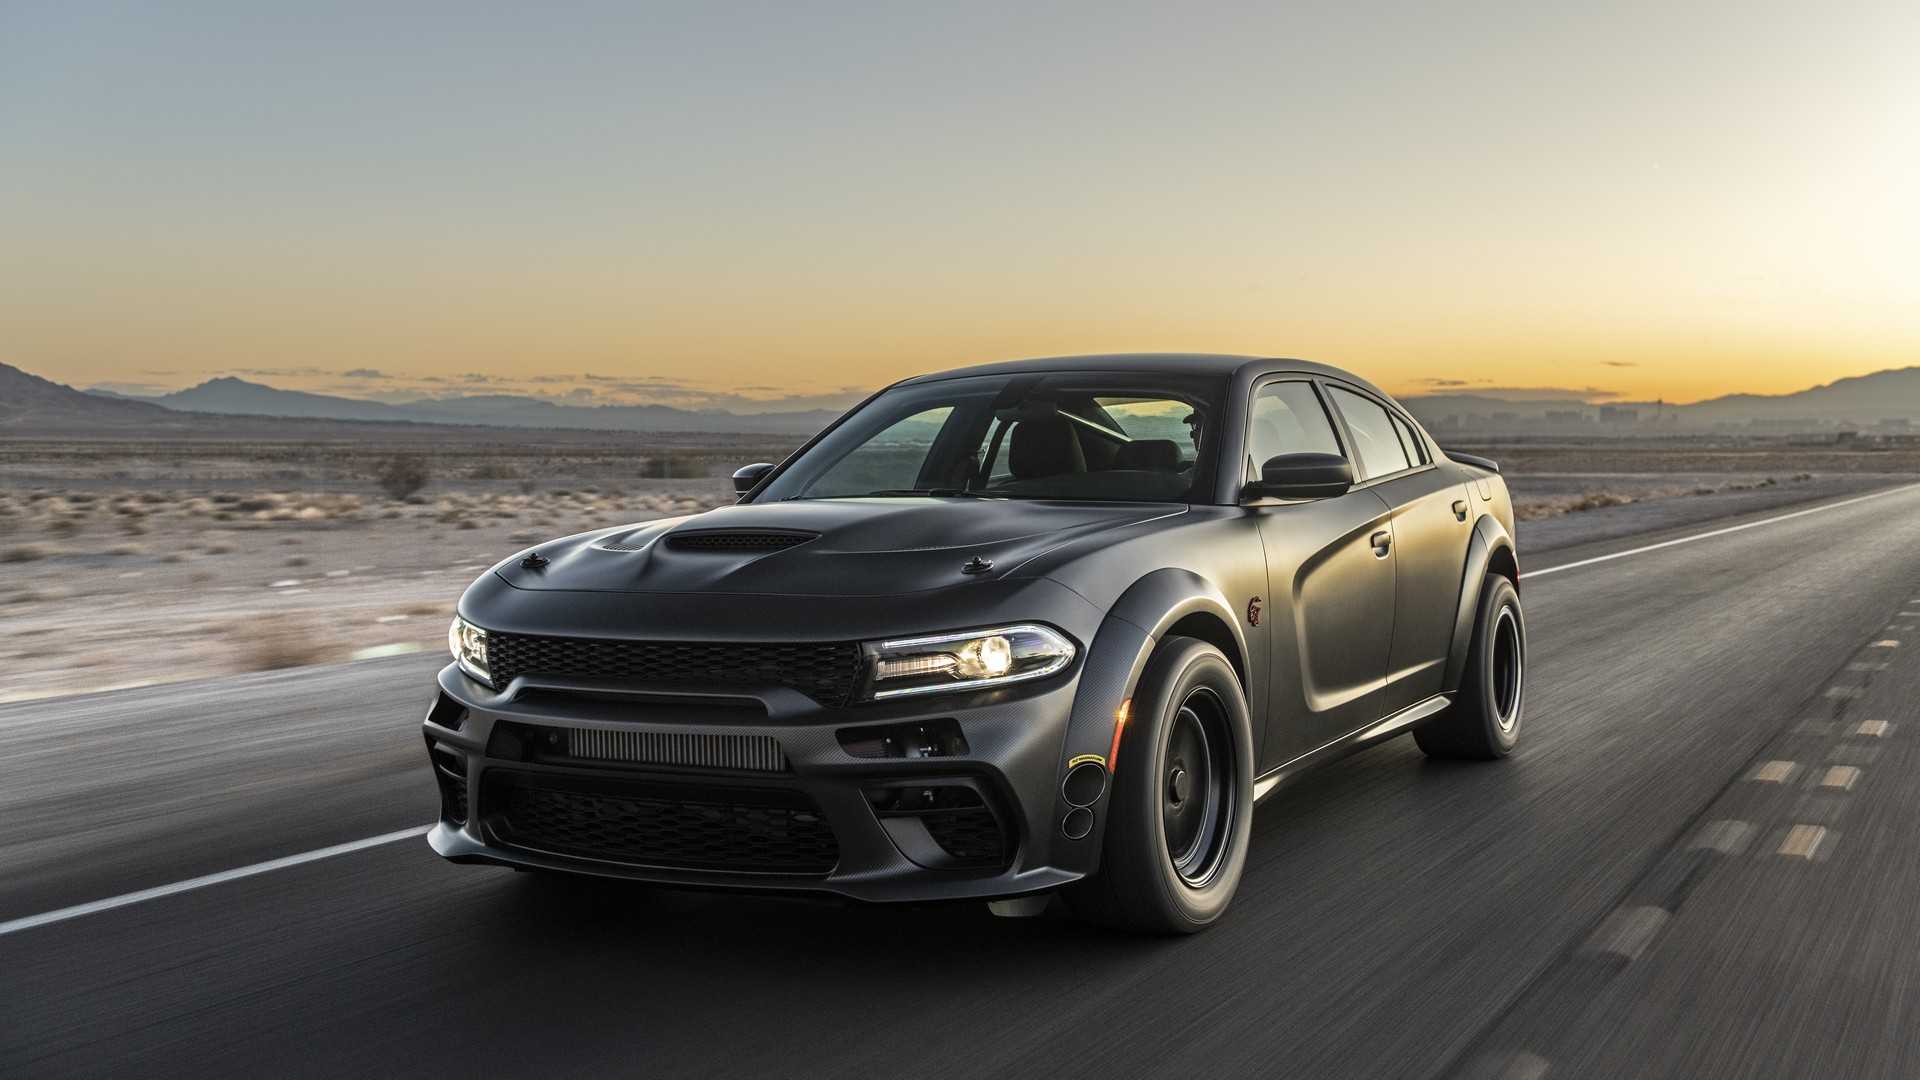 SpeedKore Reveals A 525 Hp, Twin Turbo, AWD Dodge Charger